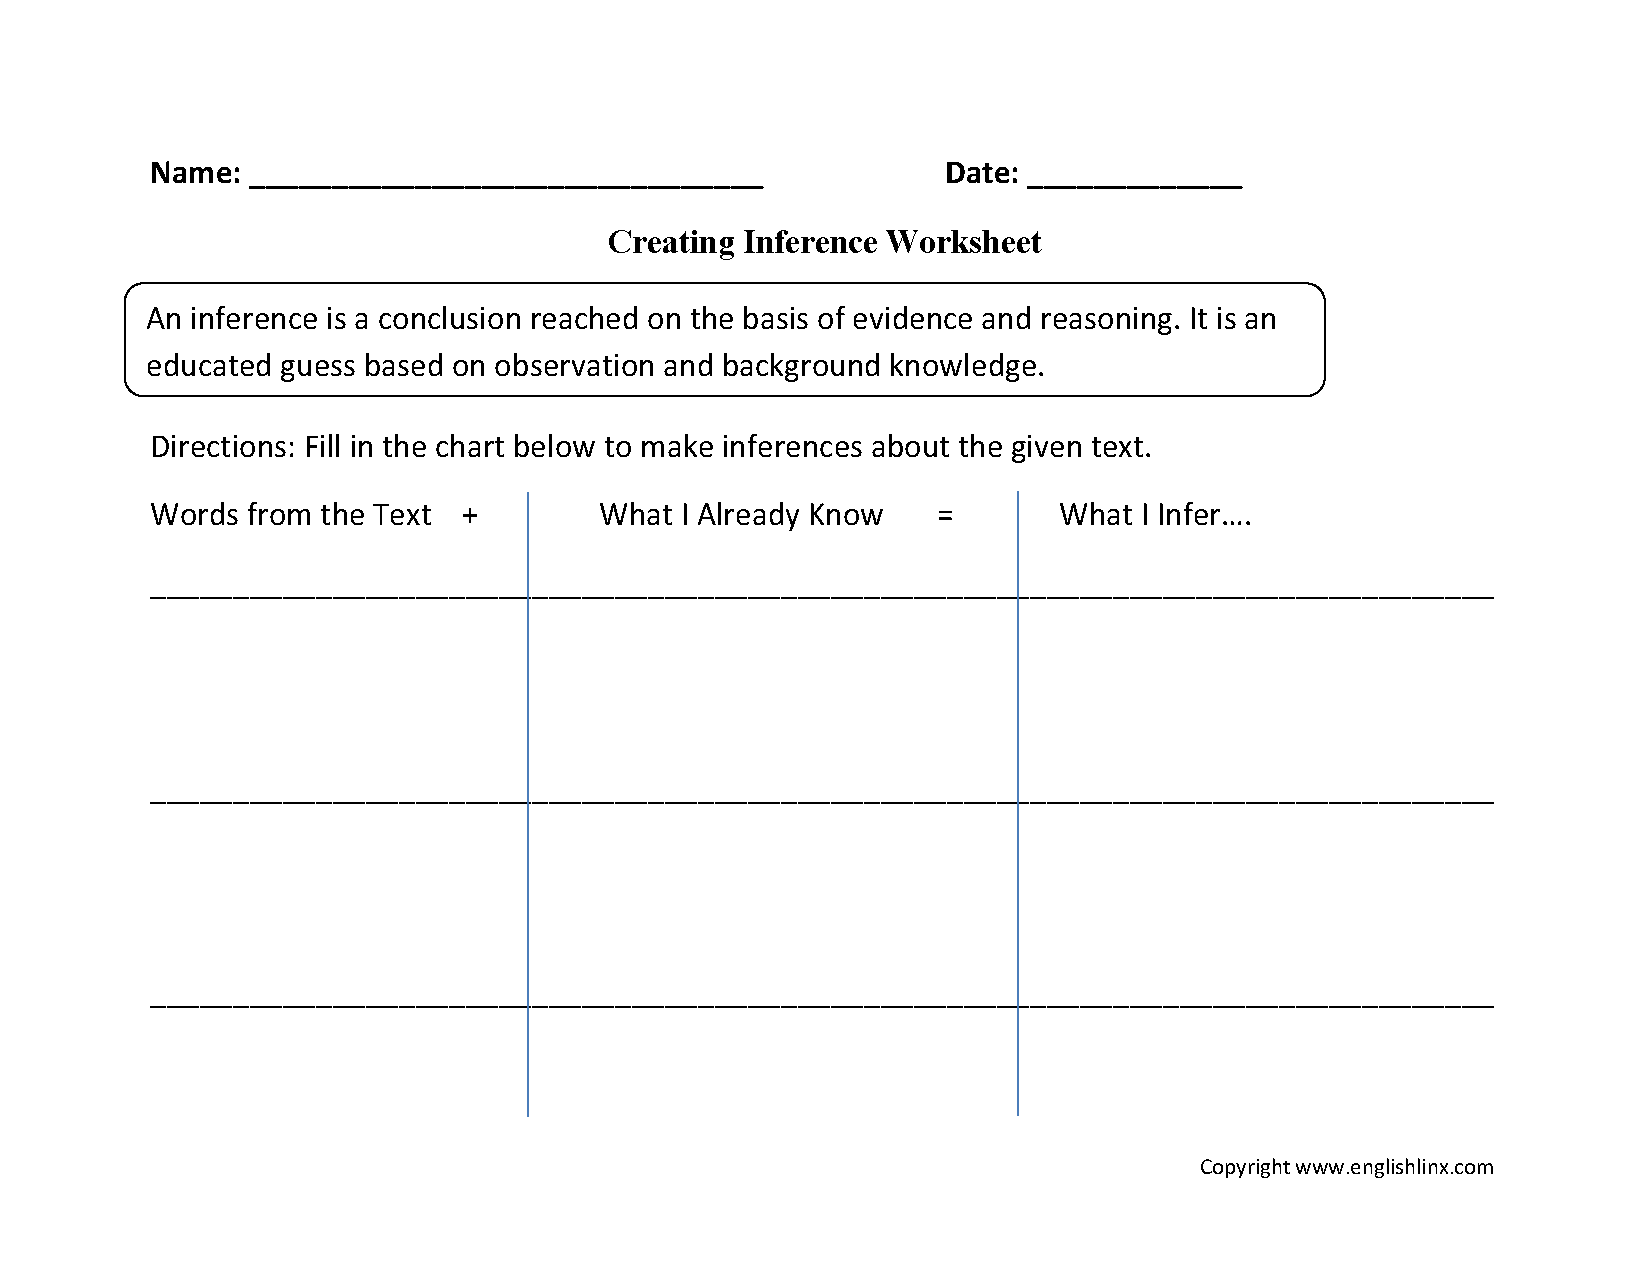 14 Best Images Of Making Inferences Worksheets 7th Grade 5th Grade Inference Graphic Organizer 